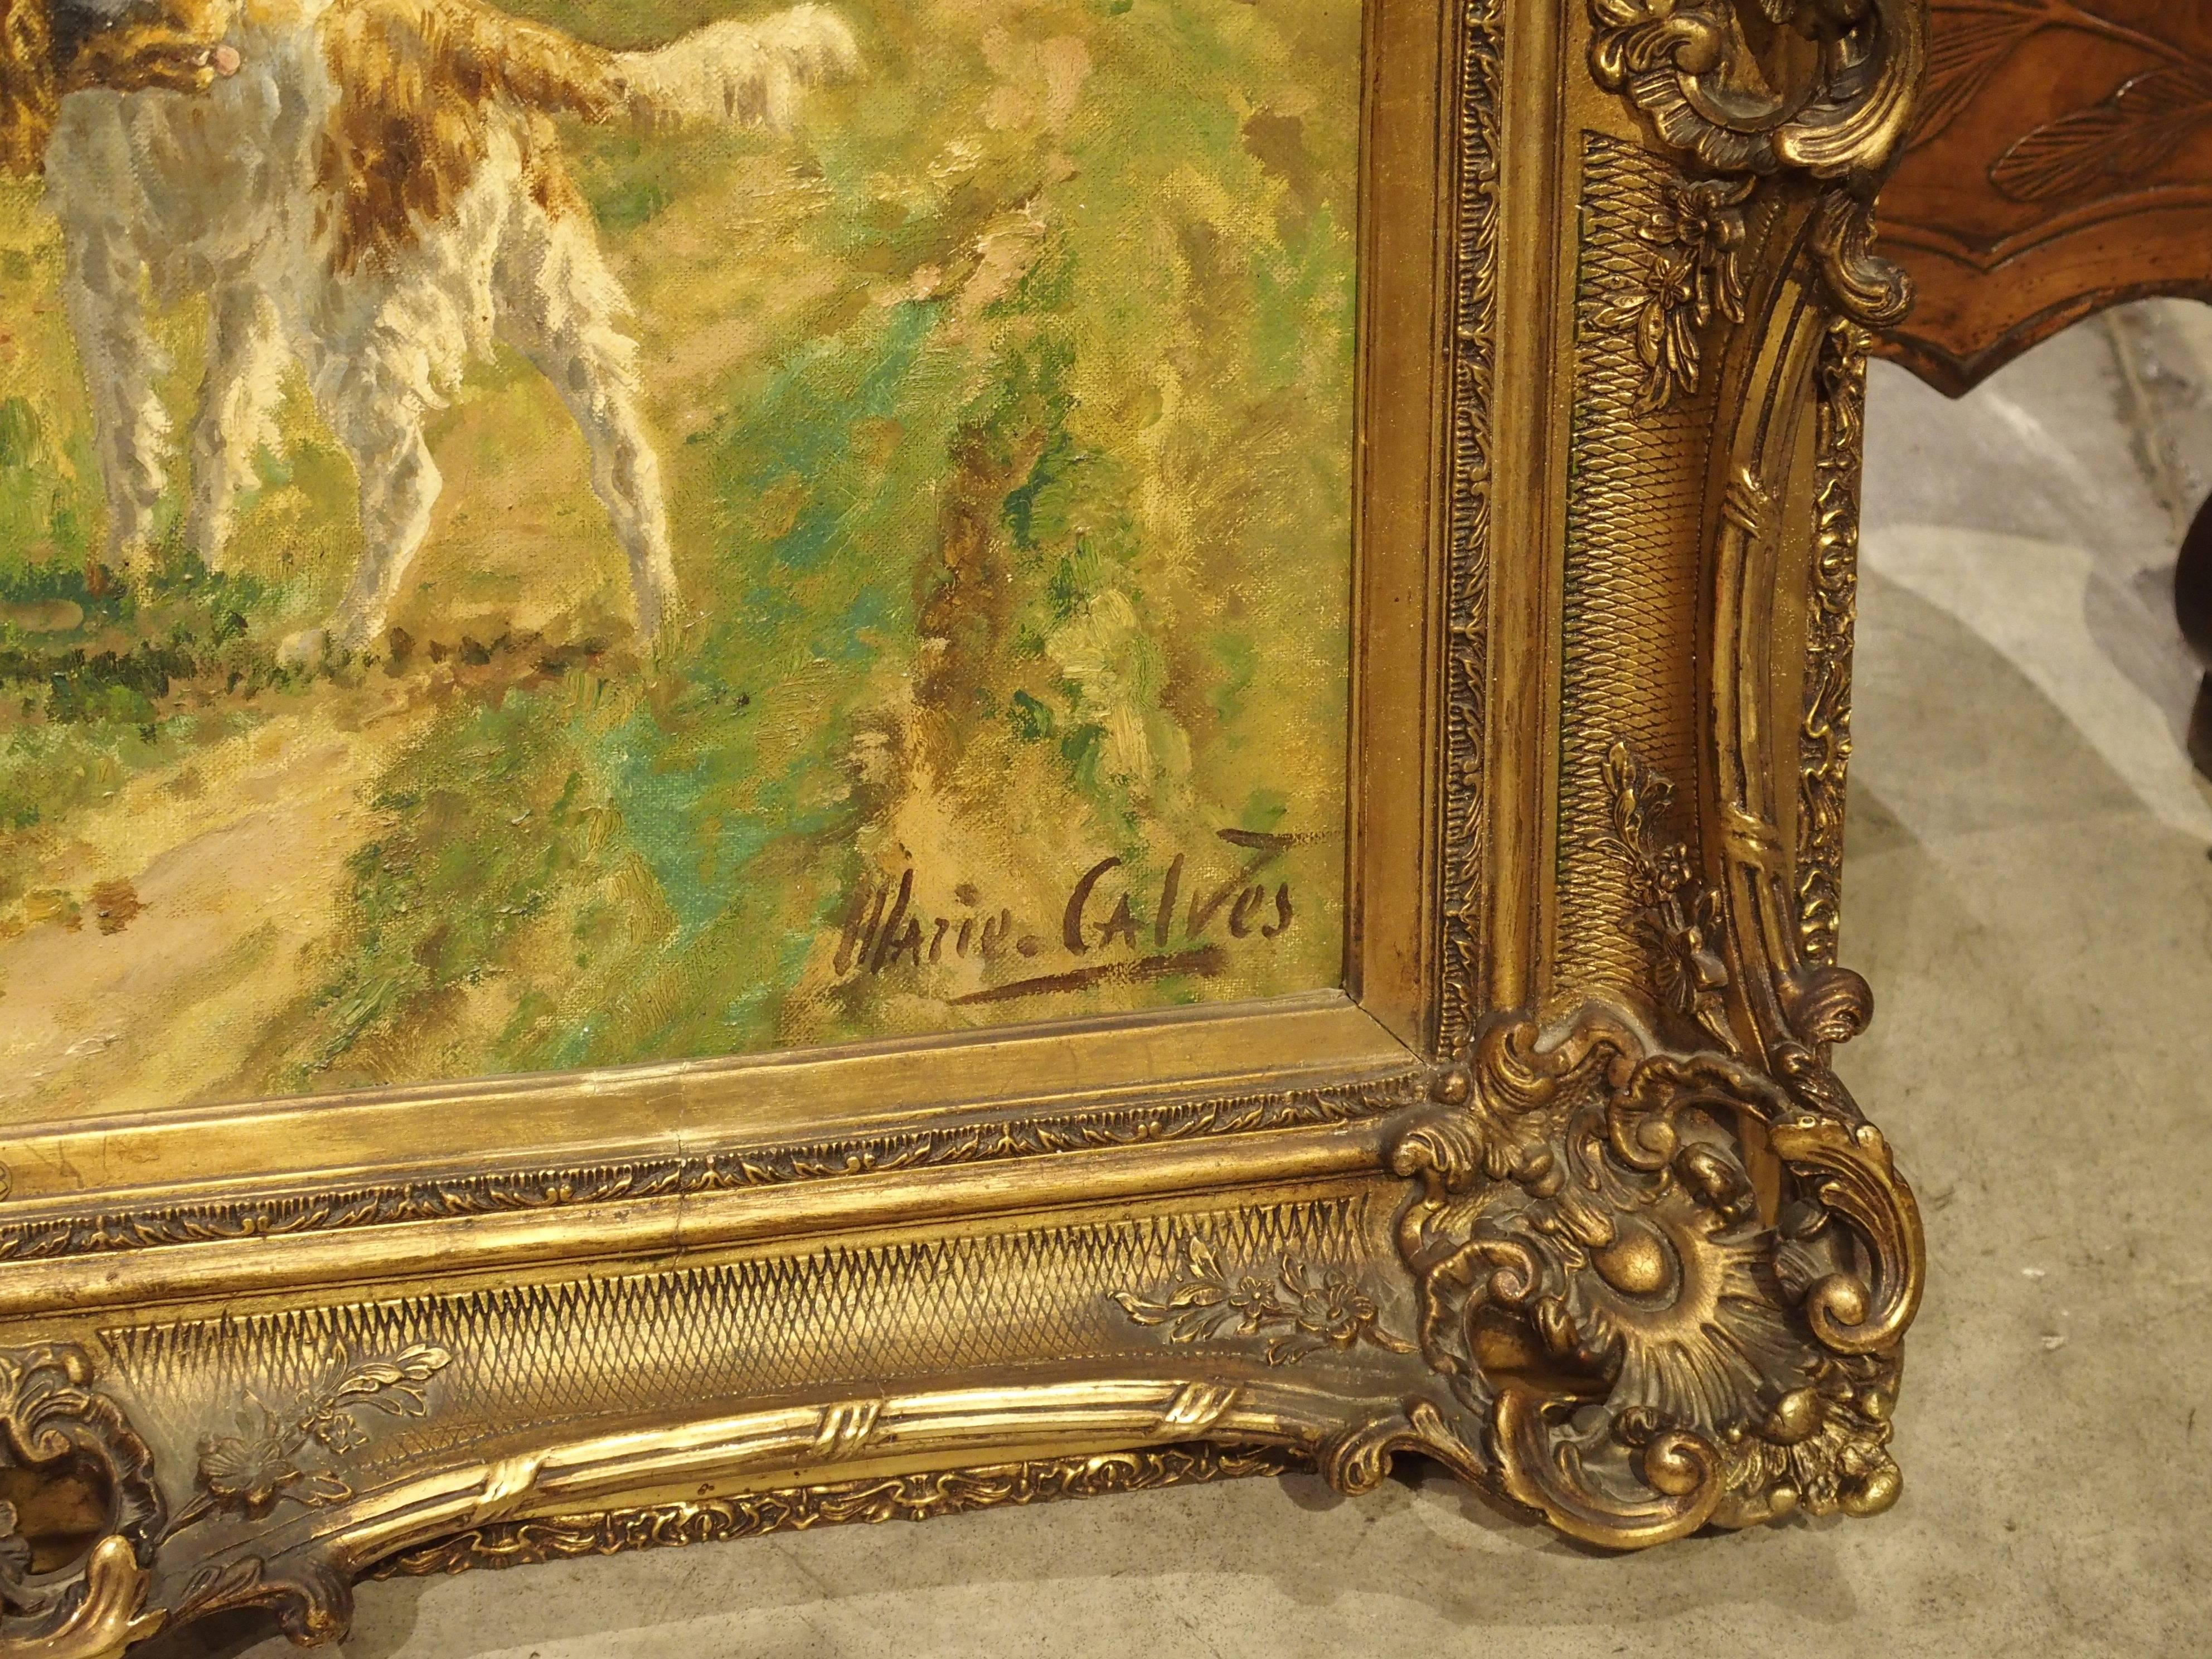 Antique French Oil Painting, Signed Marie Calves, Early 1900s 1